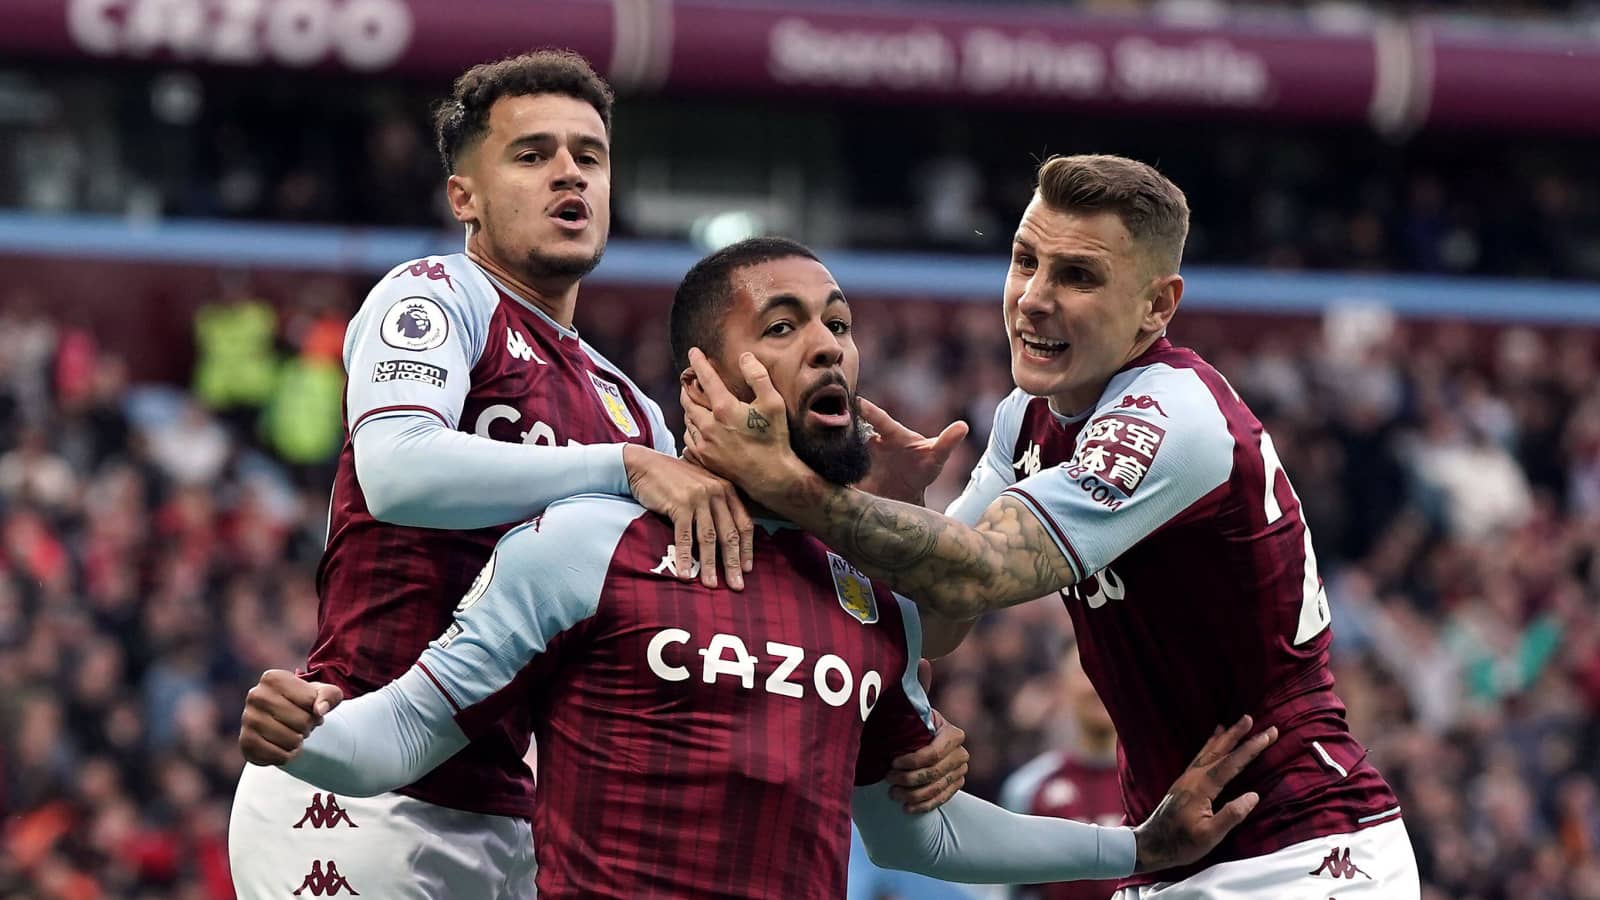 “Great alternative” – Collymore urges Newcastle to consider ‘experienced’ Aston Villa star as transfer option CaughtOffside